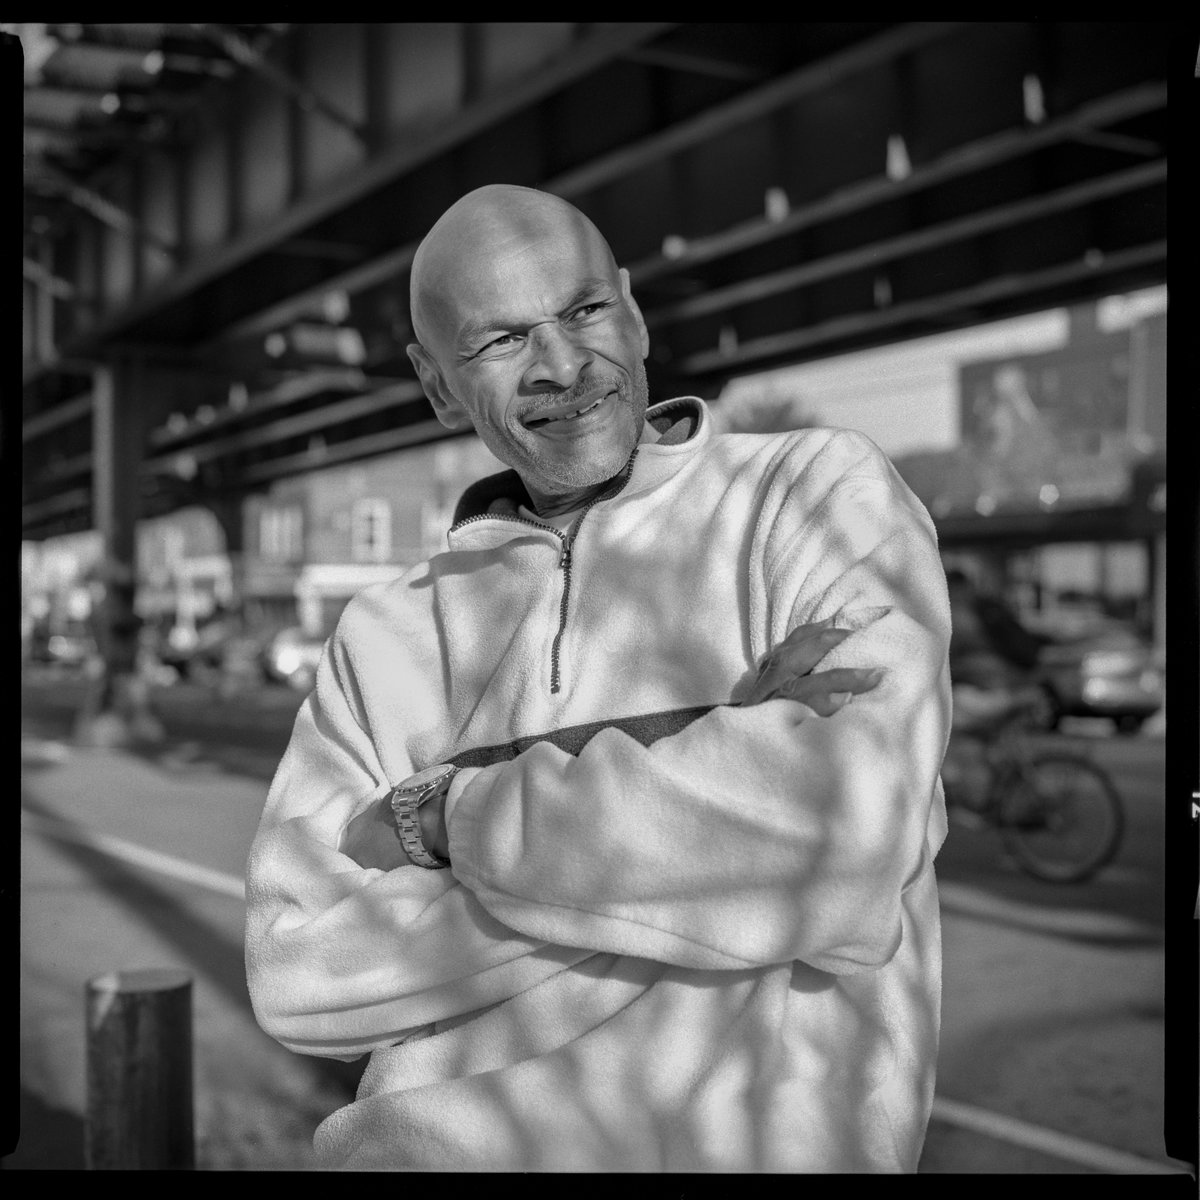 Image description: John, a slim middle-aged black man with a shaved head, looks to the side and smiles. He sits beneath an elevated train bridge in an urban neighborhood. Shadows dapple him.